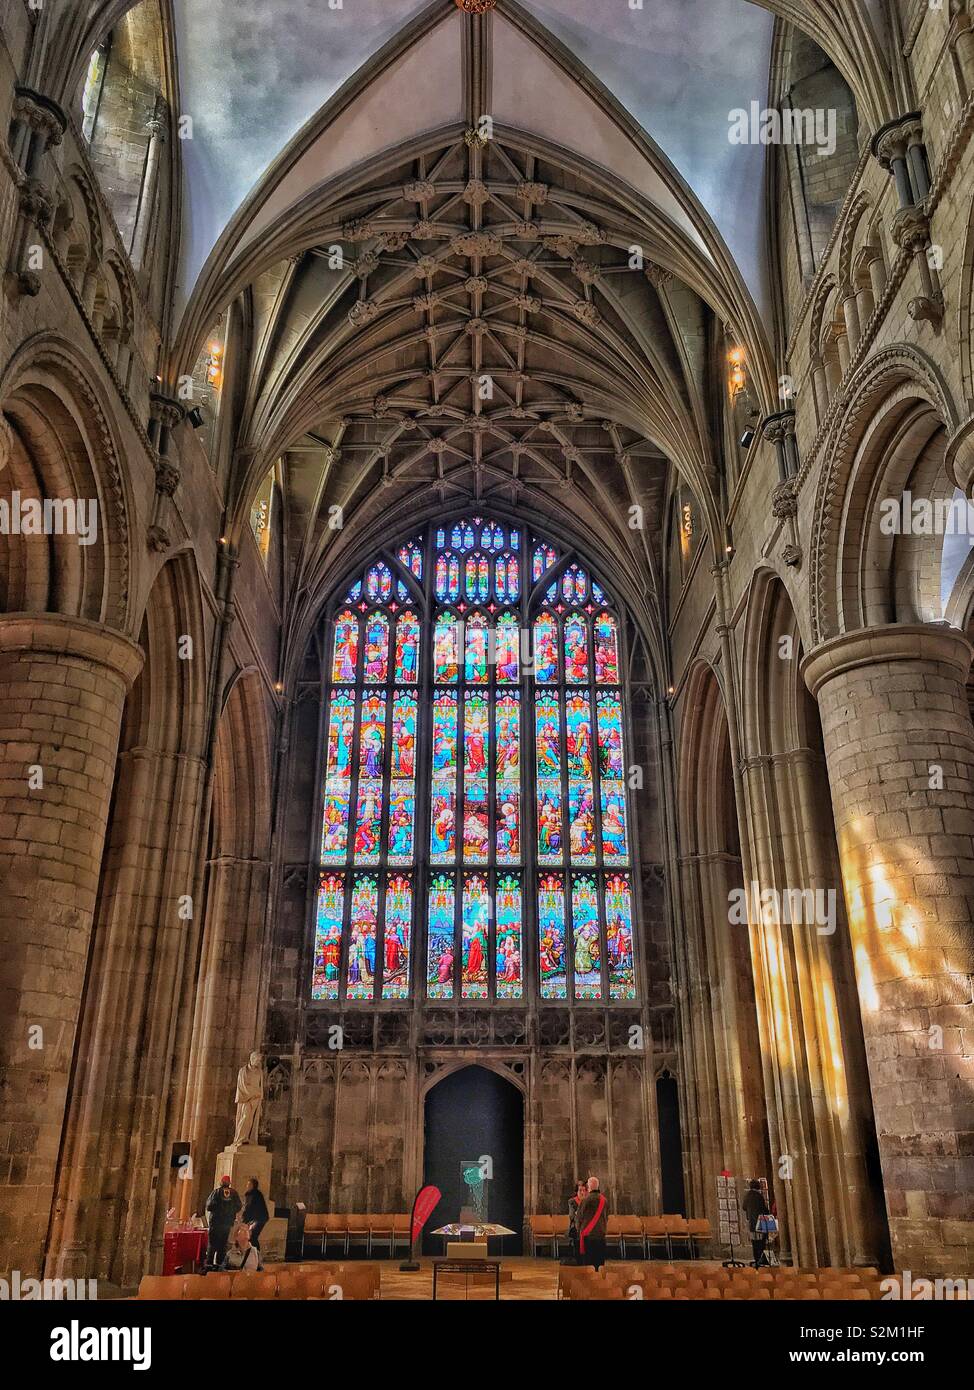 Incredible stained glass window in Gloucester cathedral Stock Photo